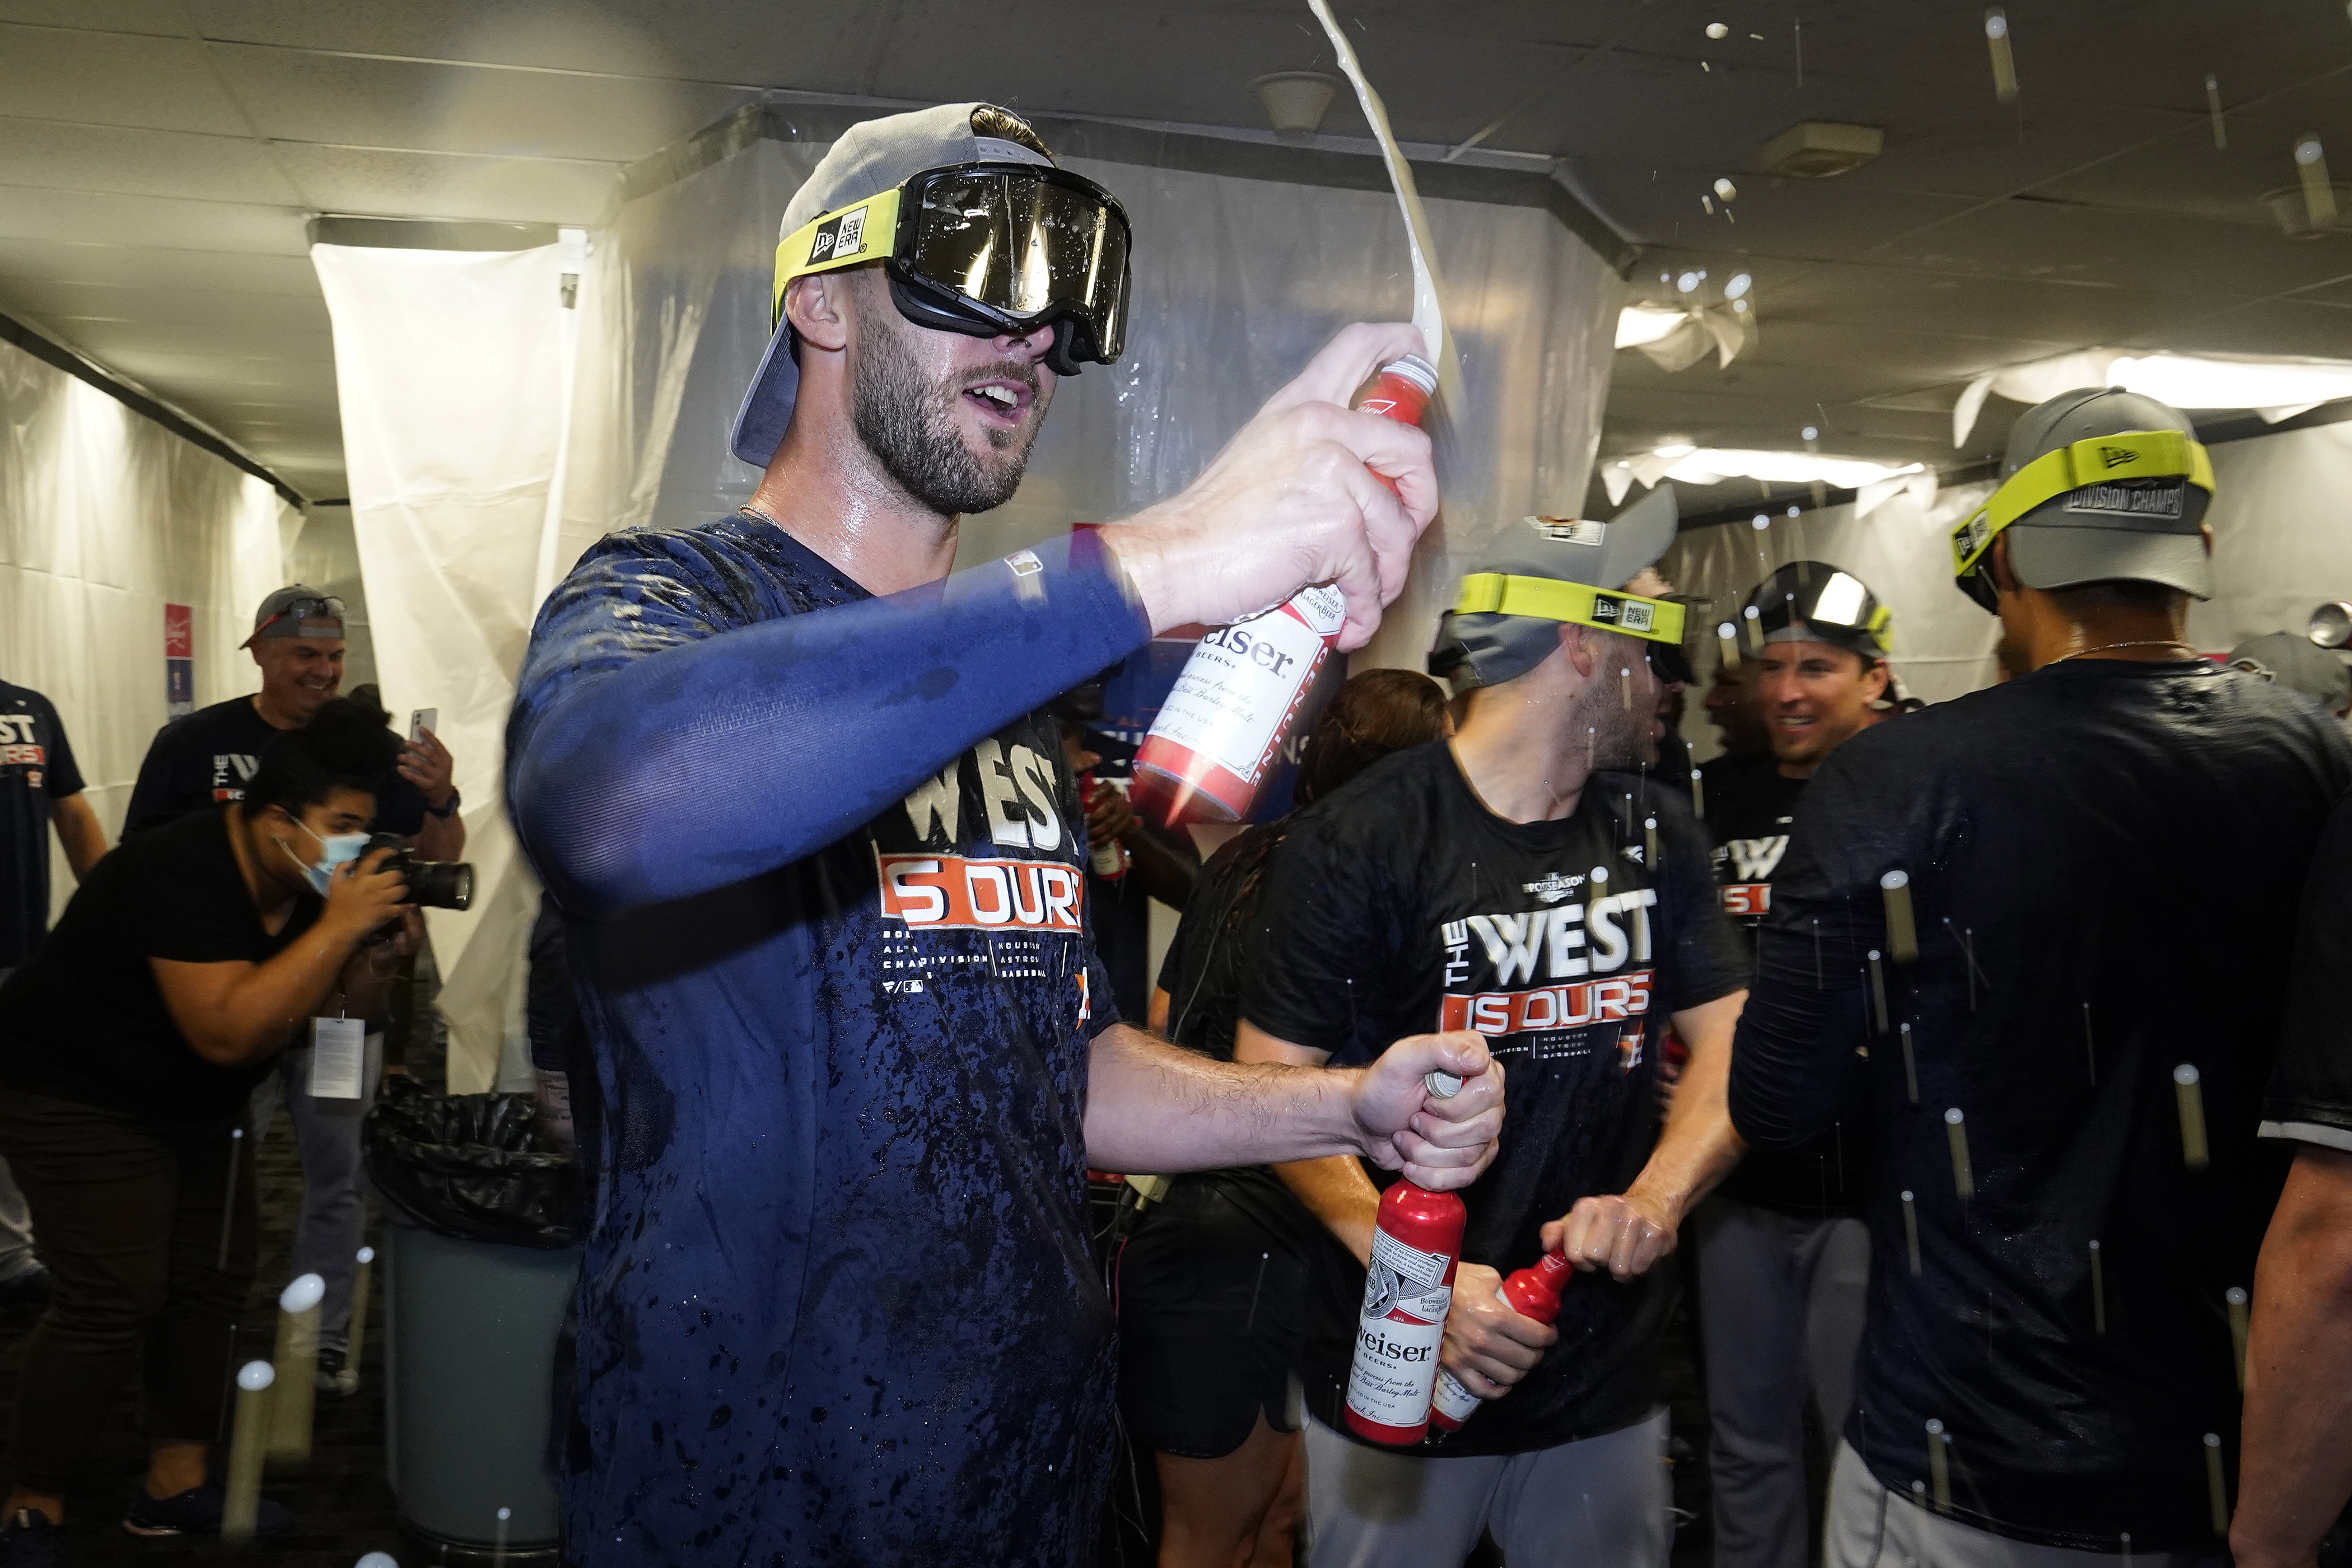 World Series-bound: Joy, shade and so much more -- See the best reactions  we could find to Houston Astros' win over the New York Yankees⚾